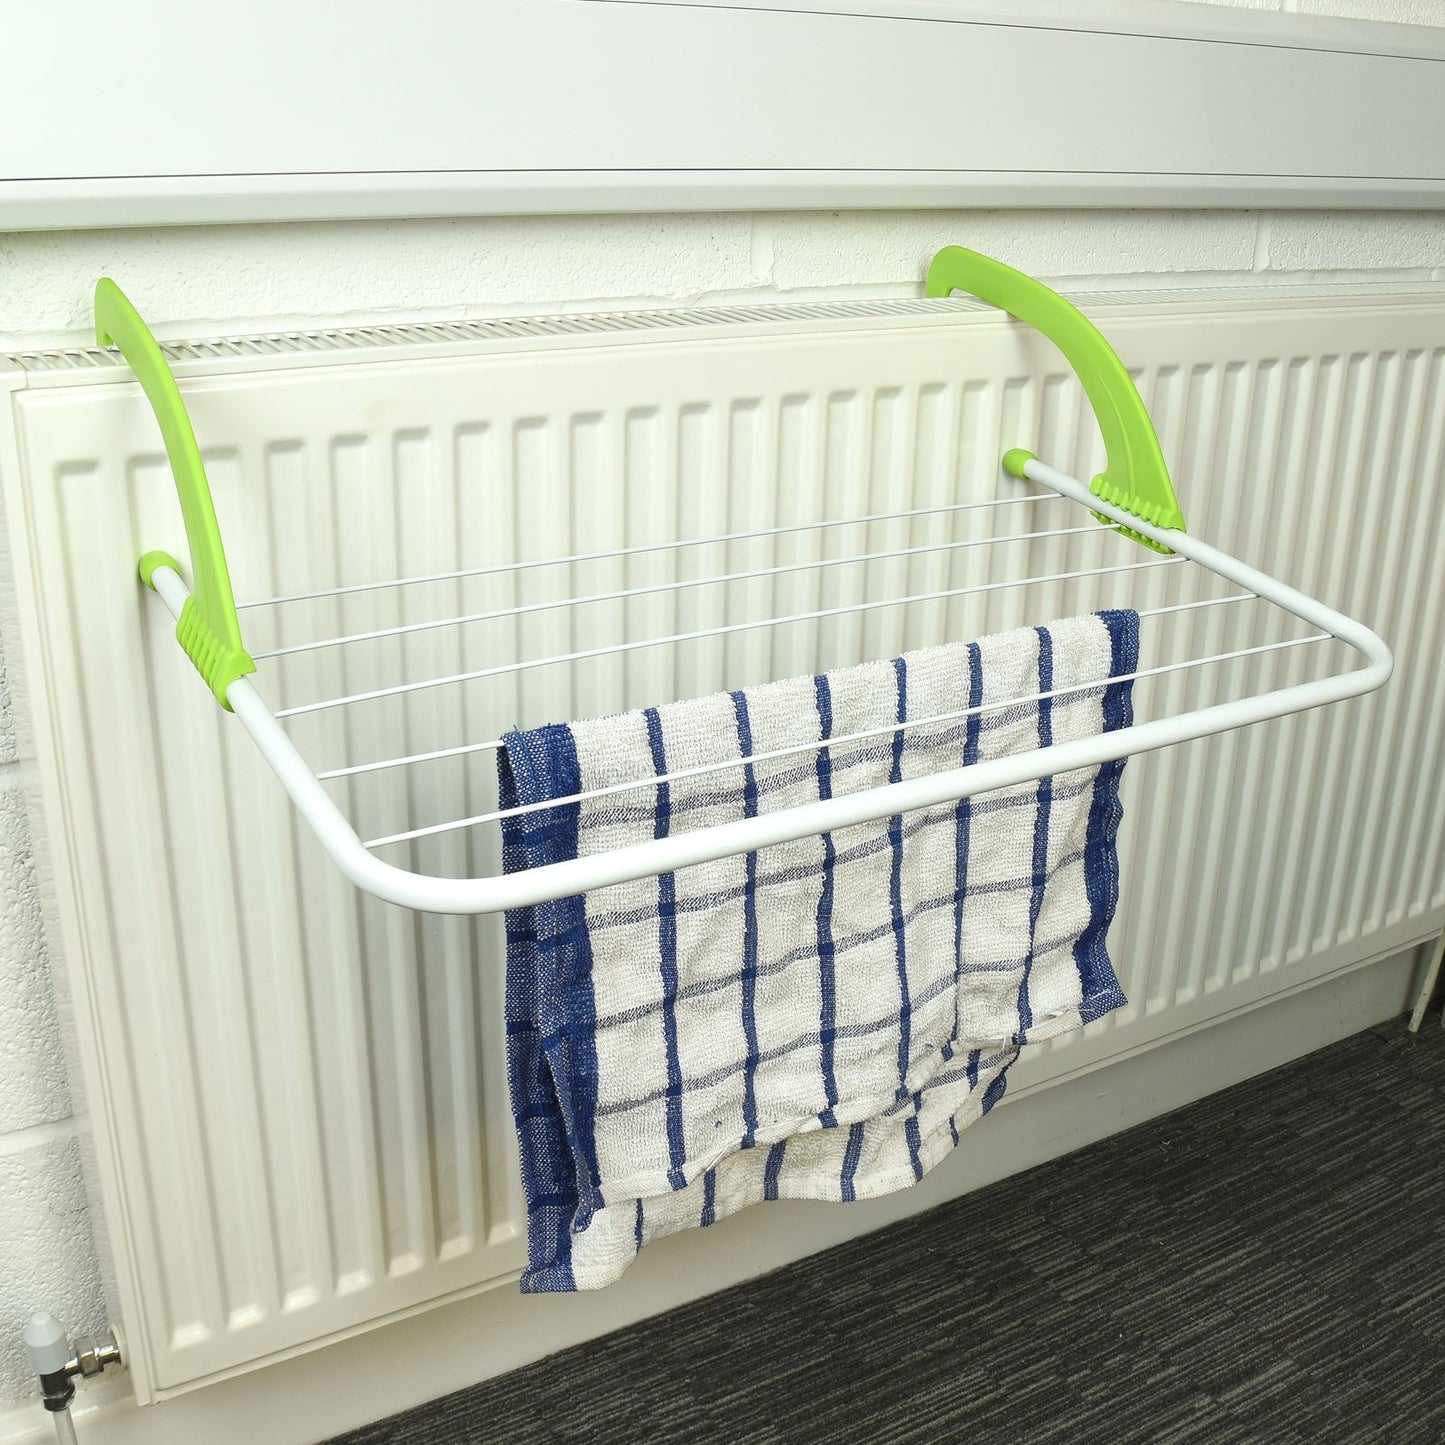 Dry Clothes with Ease with an Over-Radiator Clothes Airer